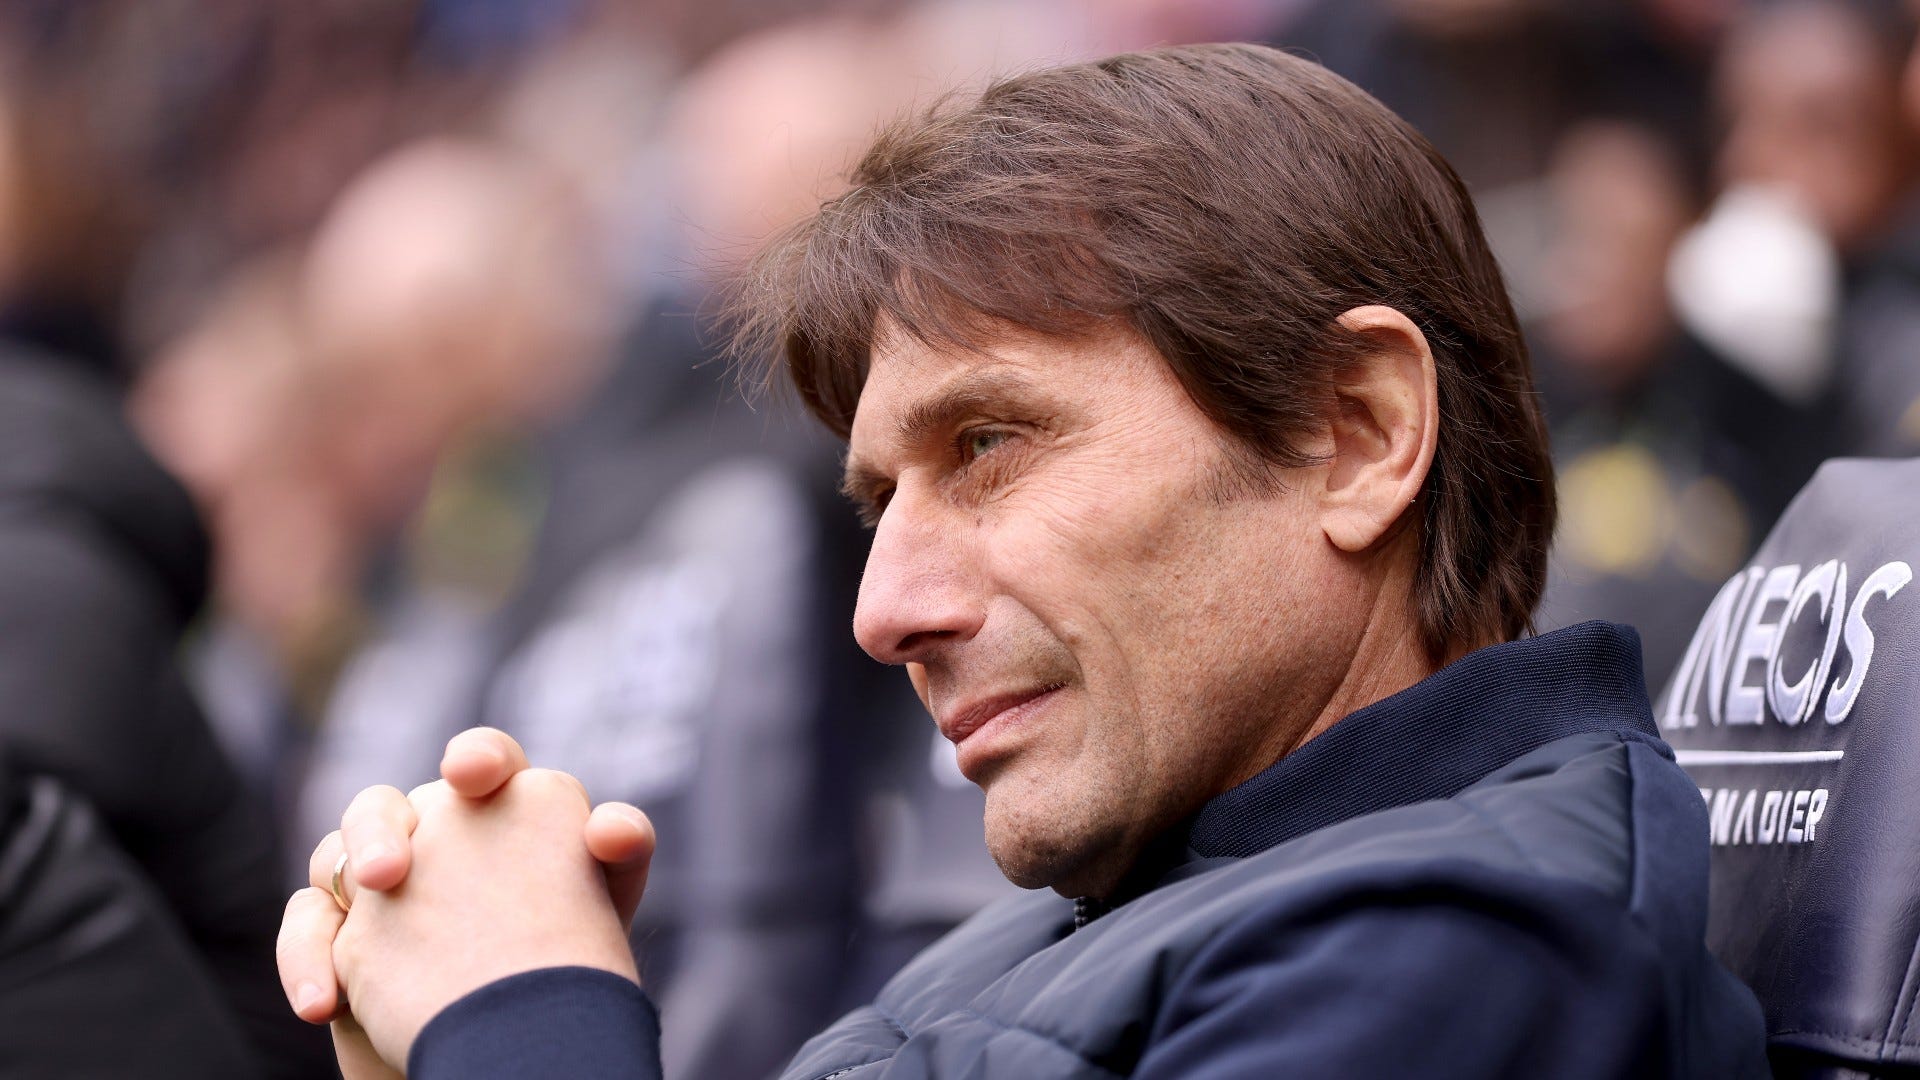 Antonio Conte rejects initial approach from Roma - Get Italian Football News